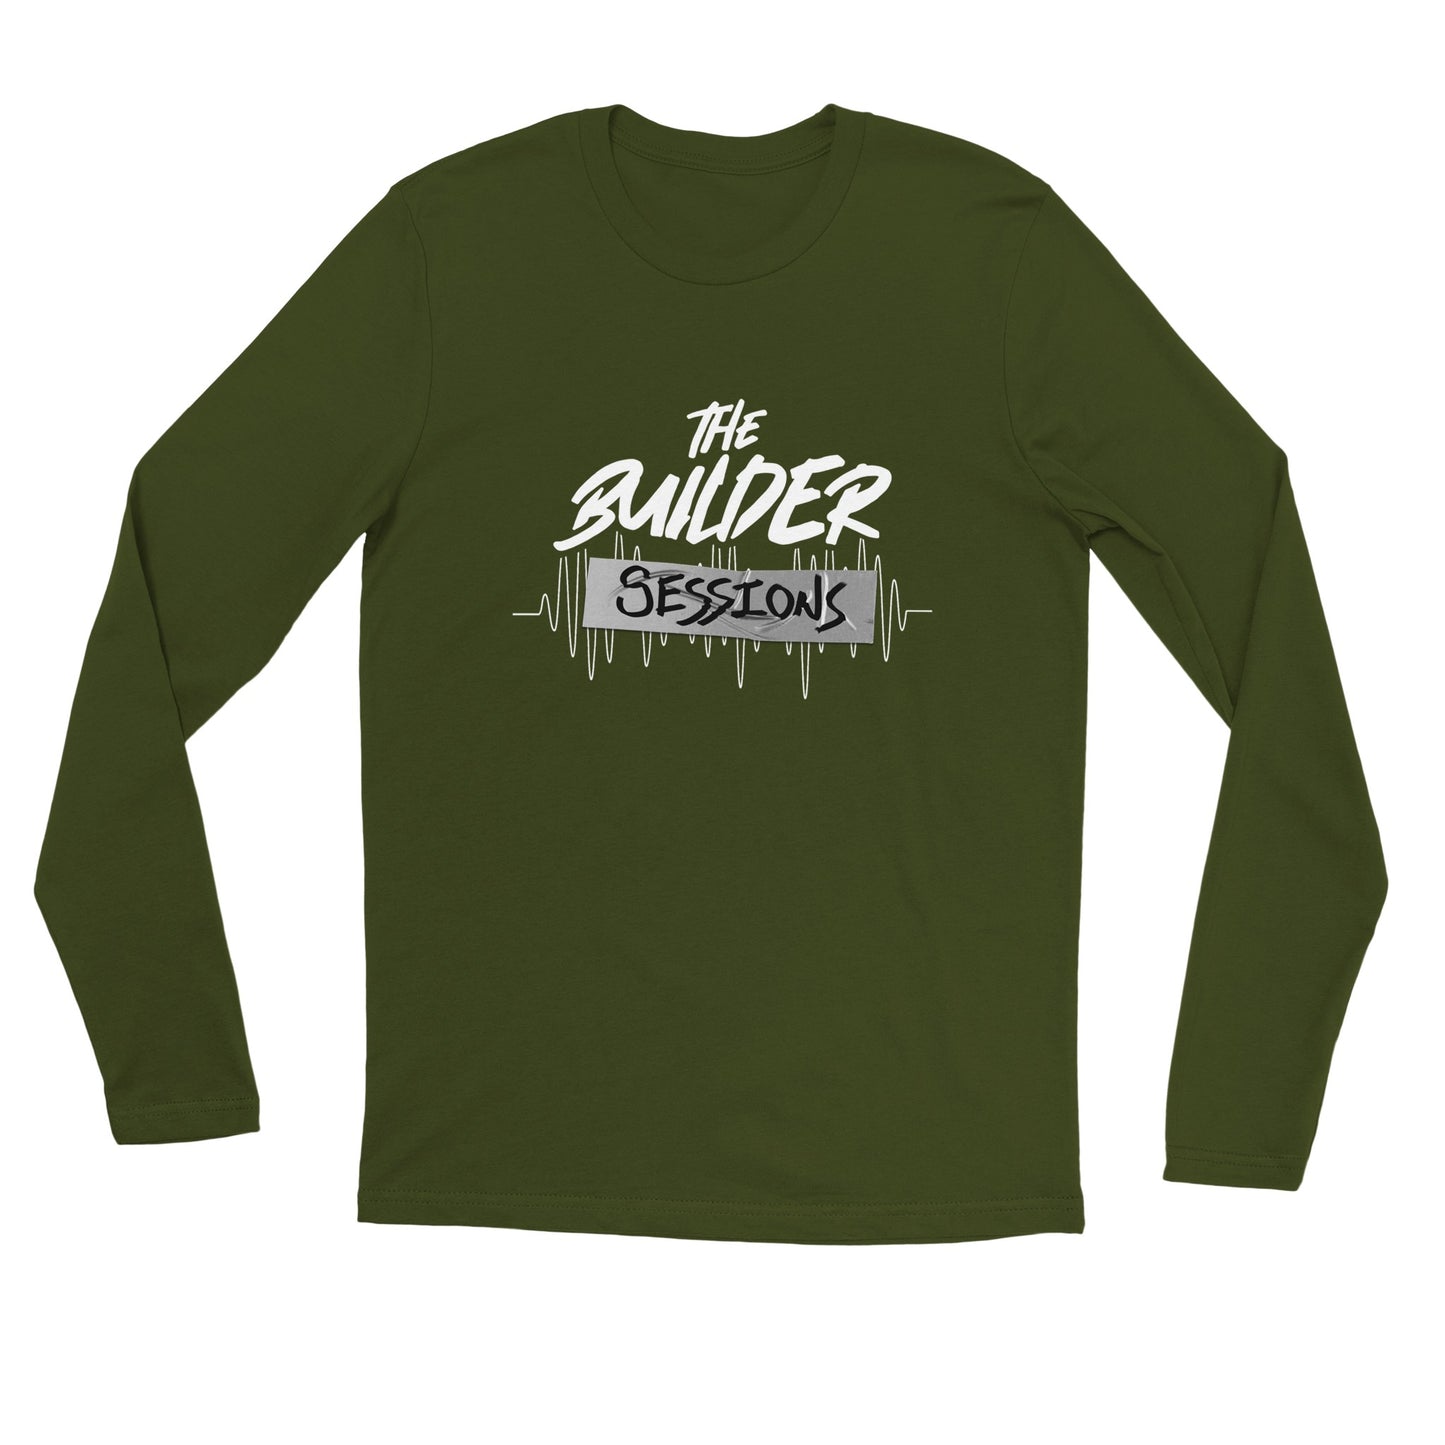 Duct Tape Builder Sessions Longsleeve T-shirt